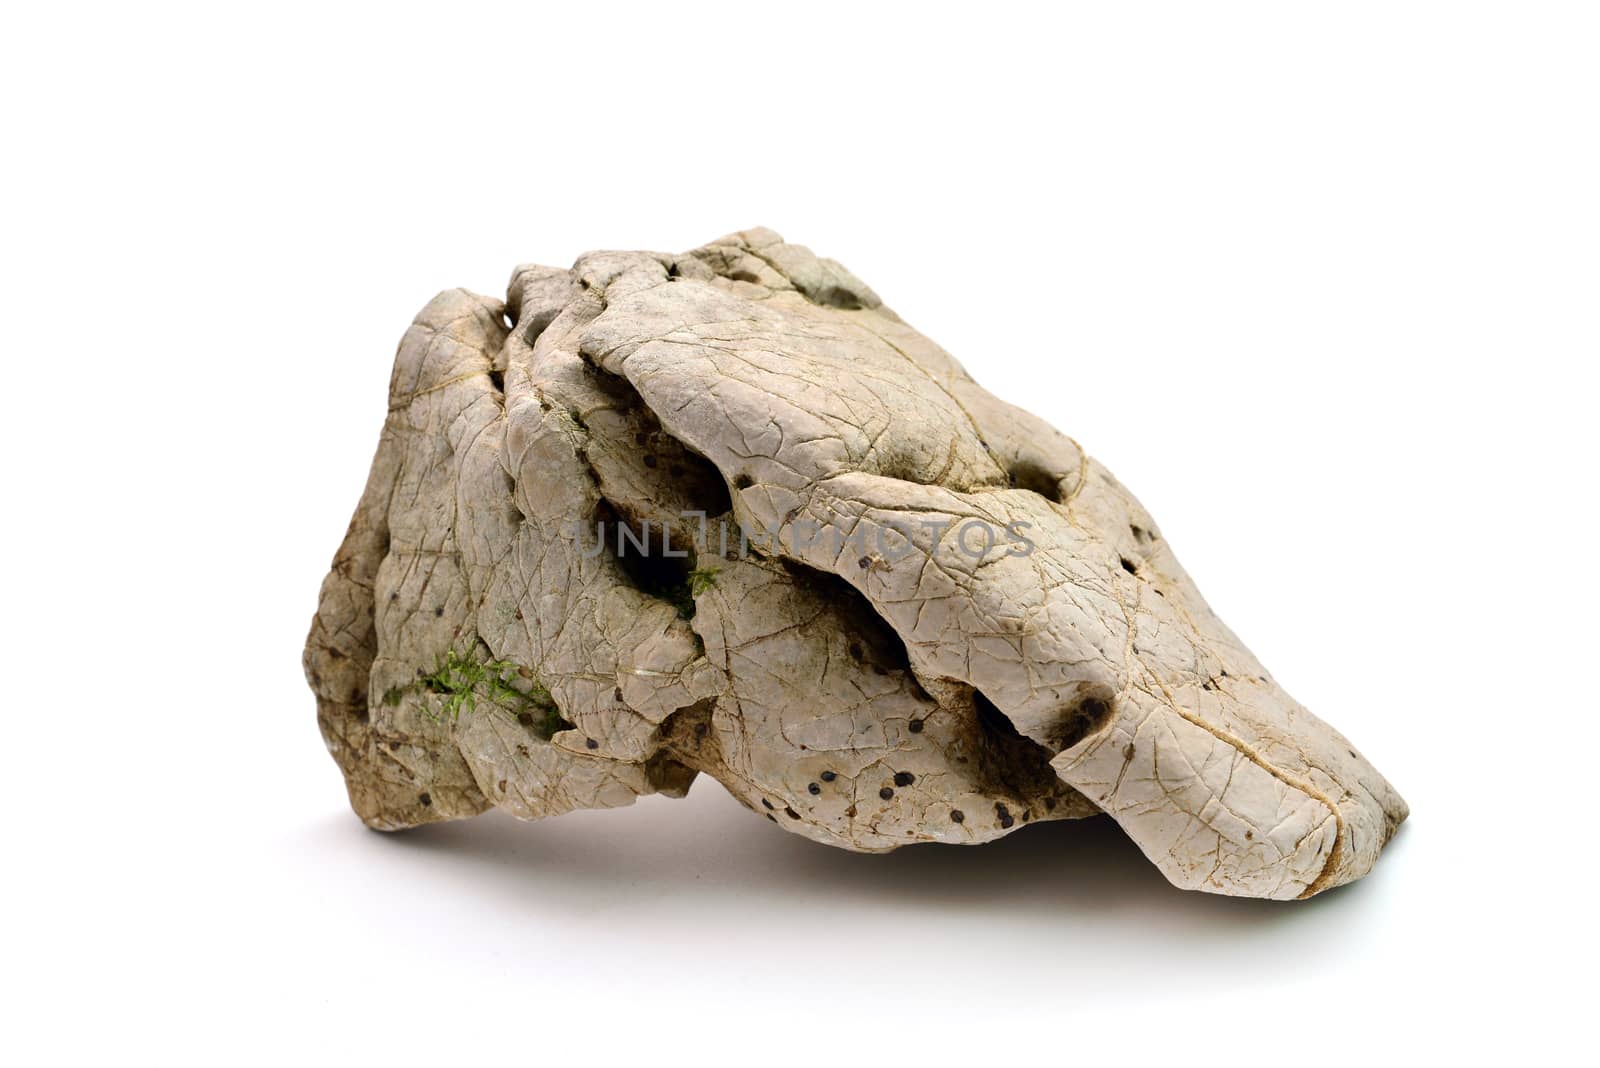 one simple natural rock over white background